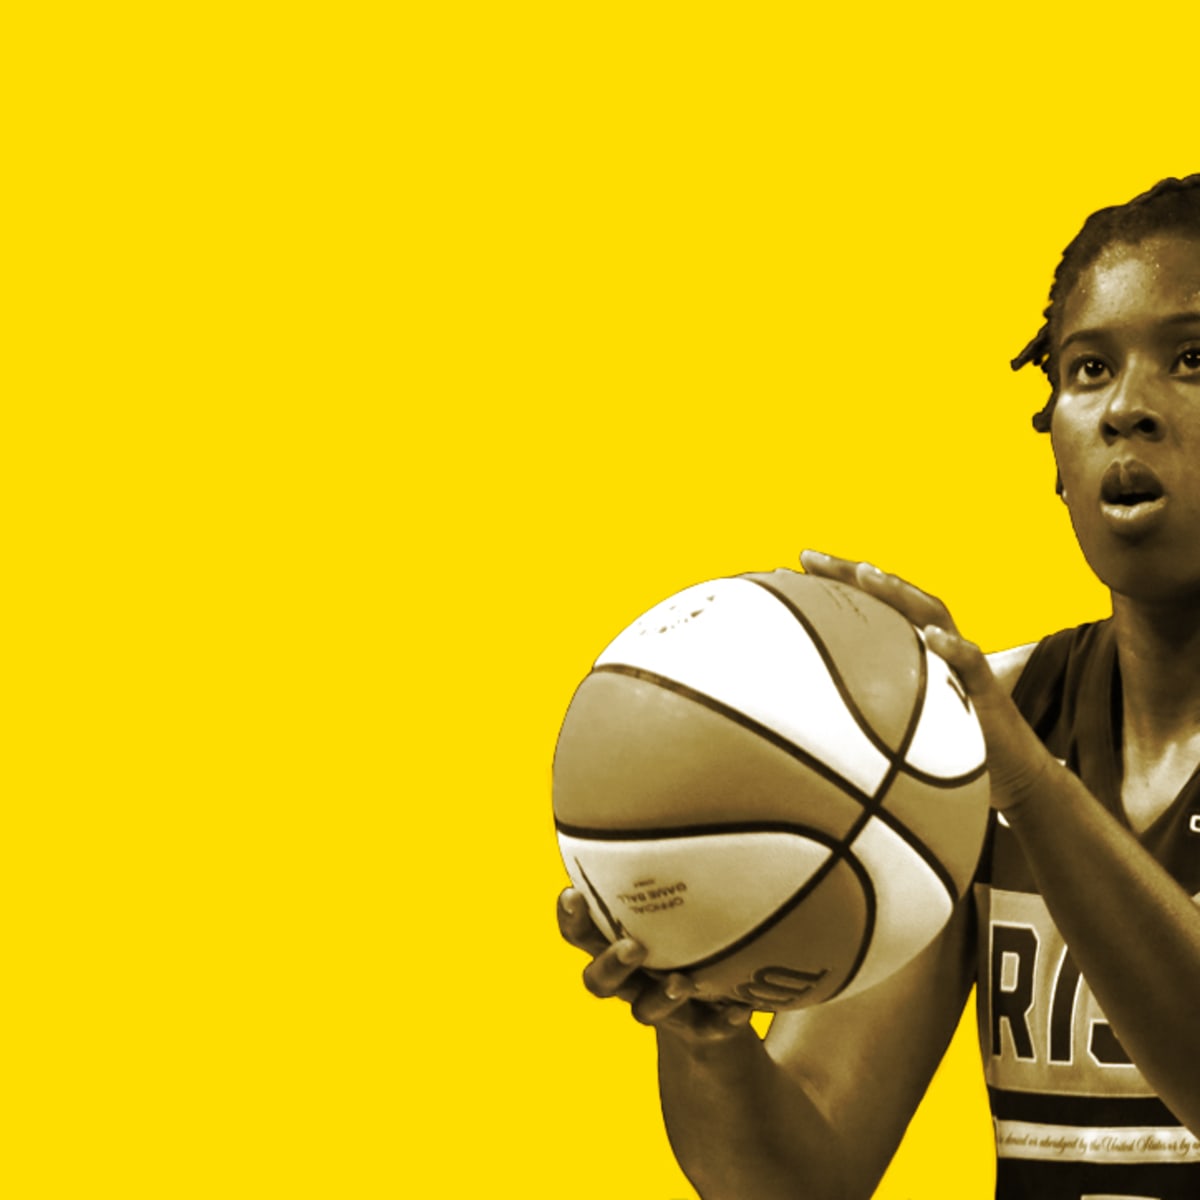 Guard Tamika Catchings (10) of the United States of America shoots